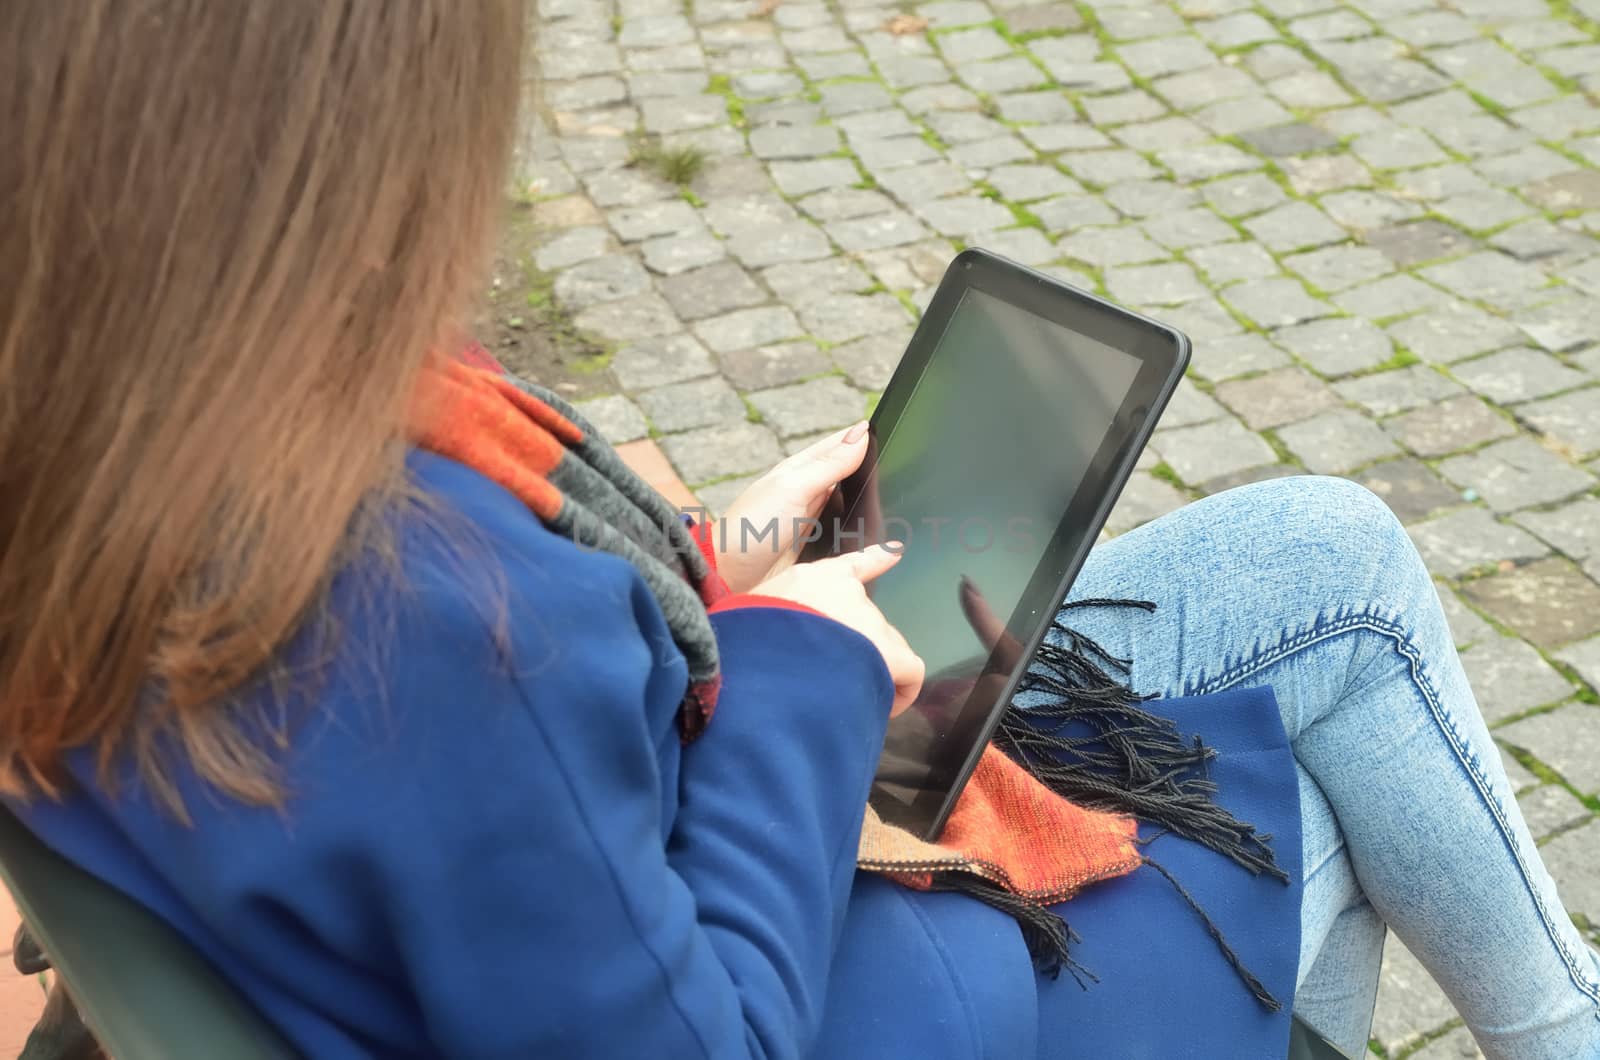 A woman is seated on a bench and uses a black tablet by xzgorik